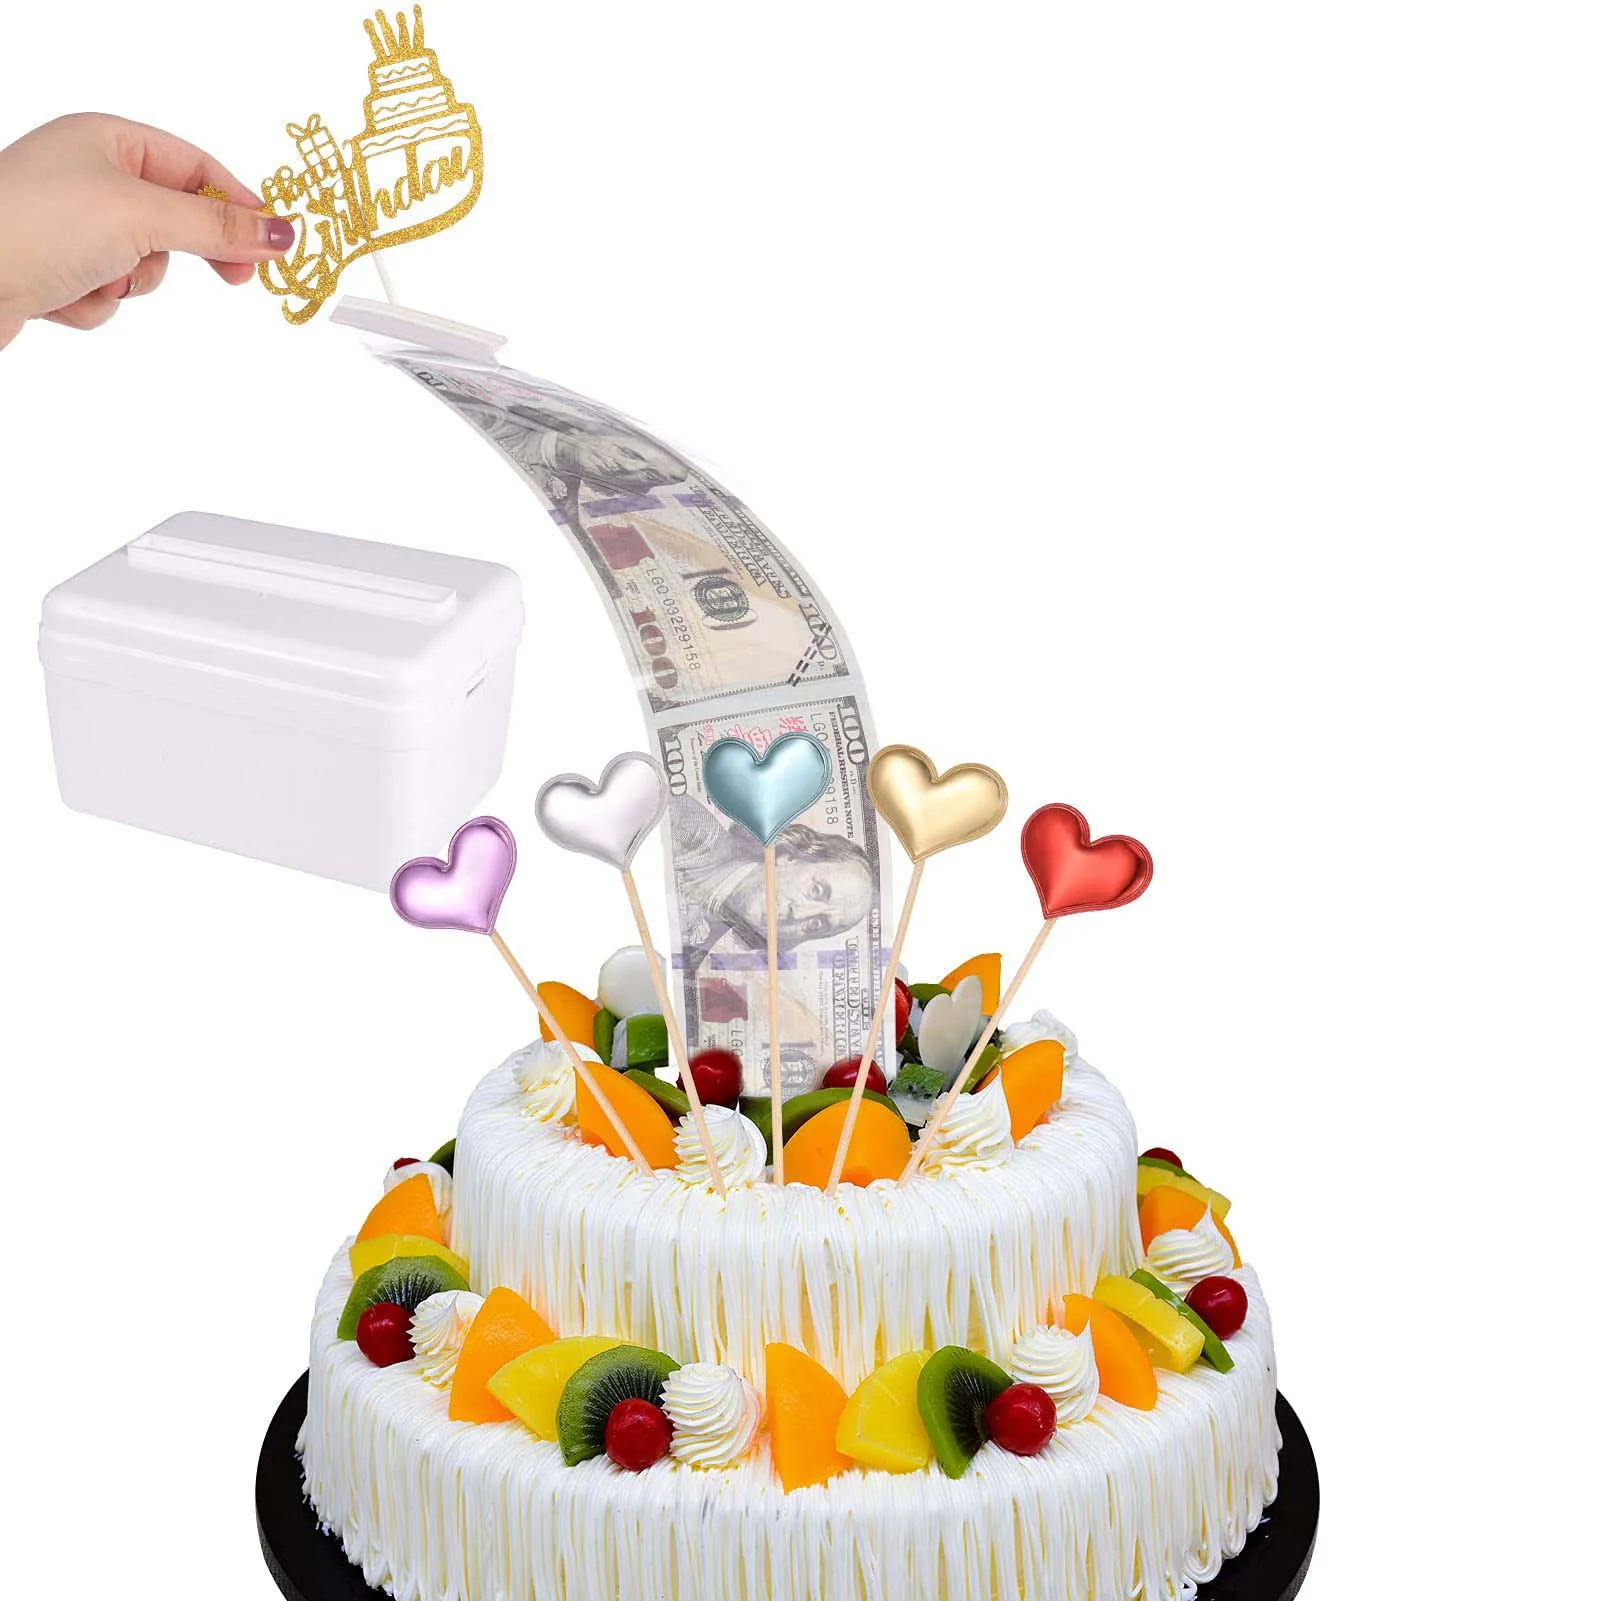 Top 74+ cake with money inside - awesomeenglish.edu.vn